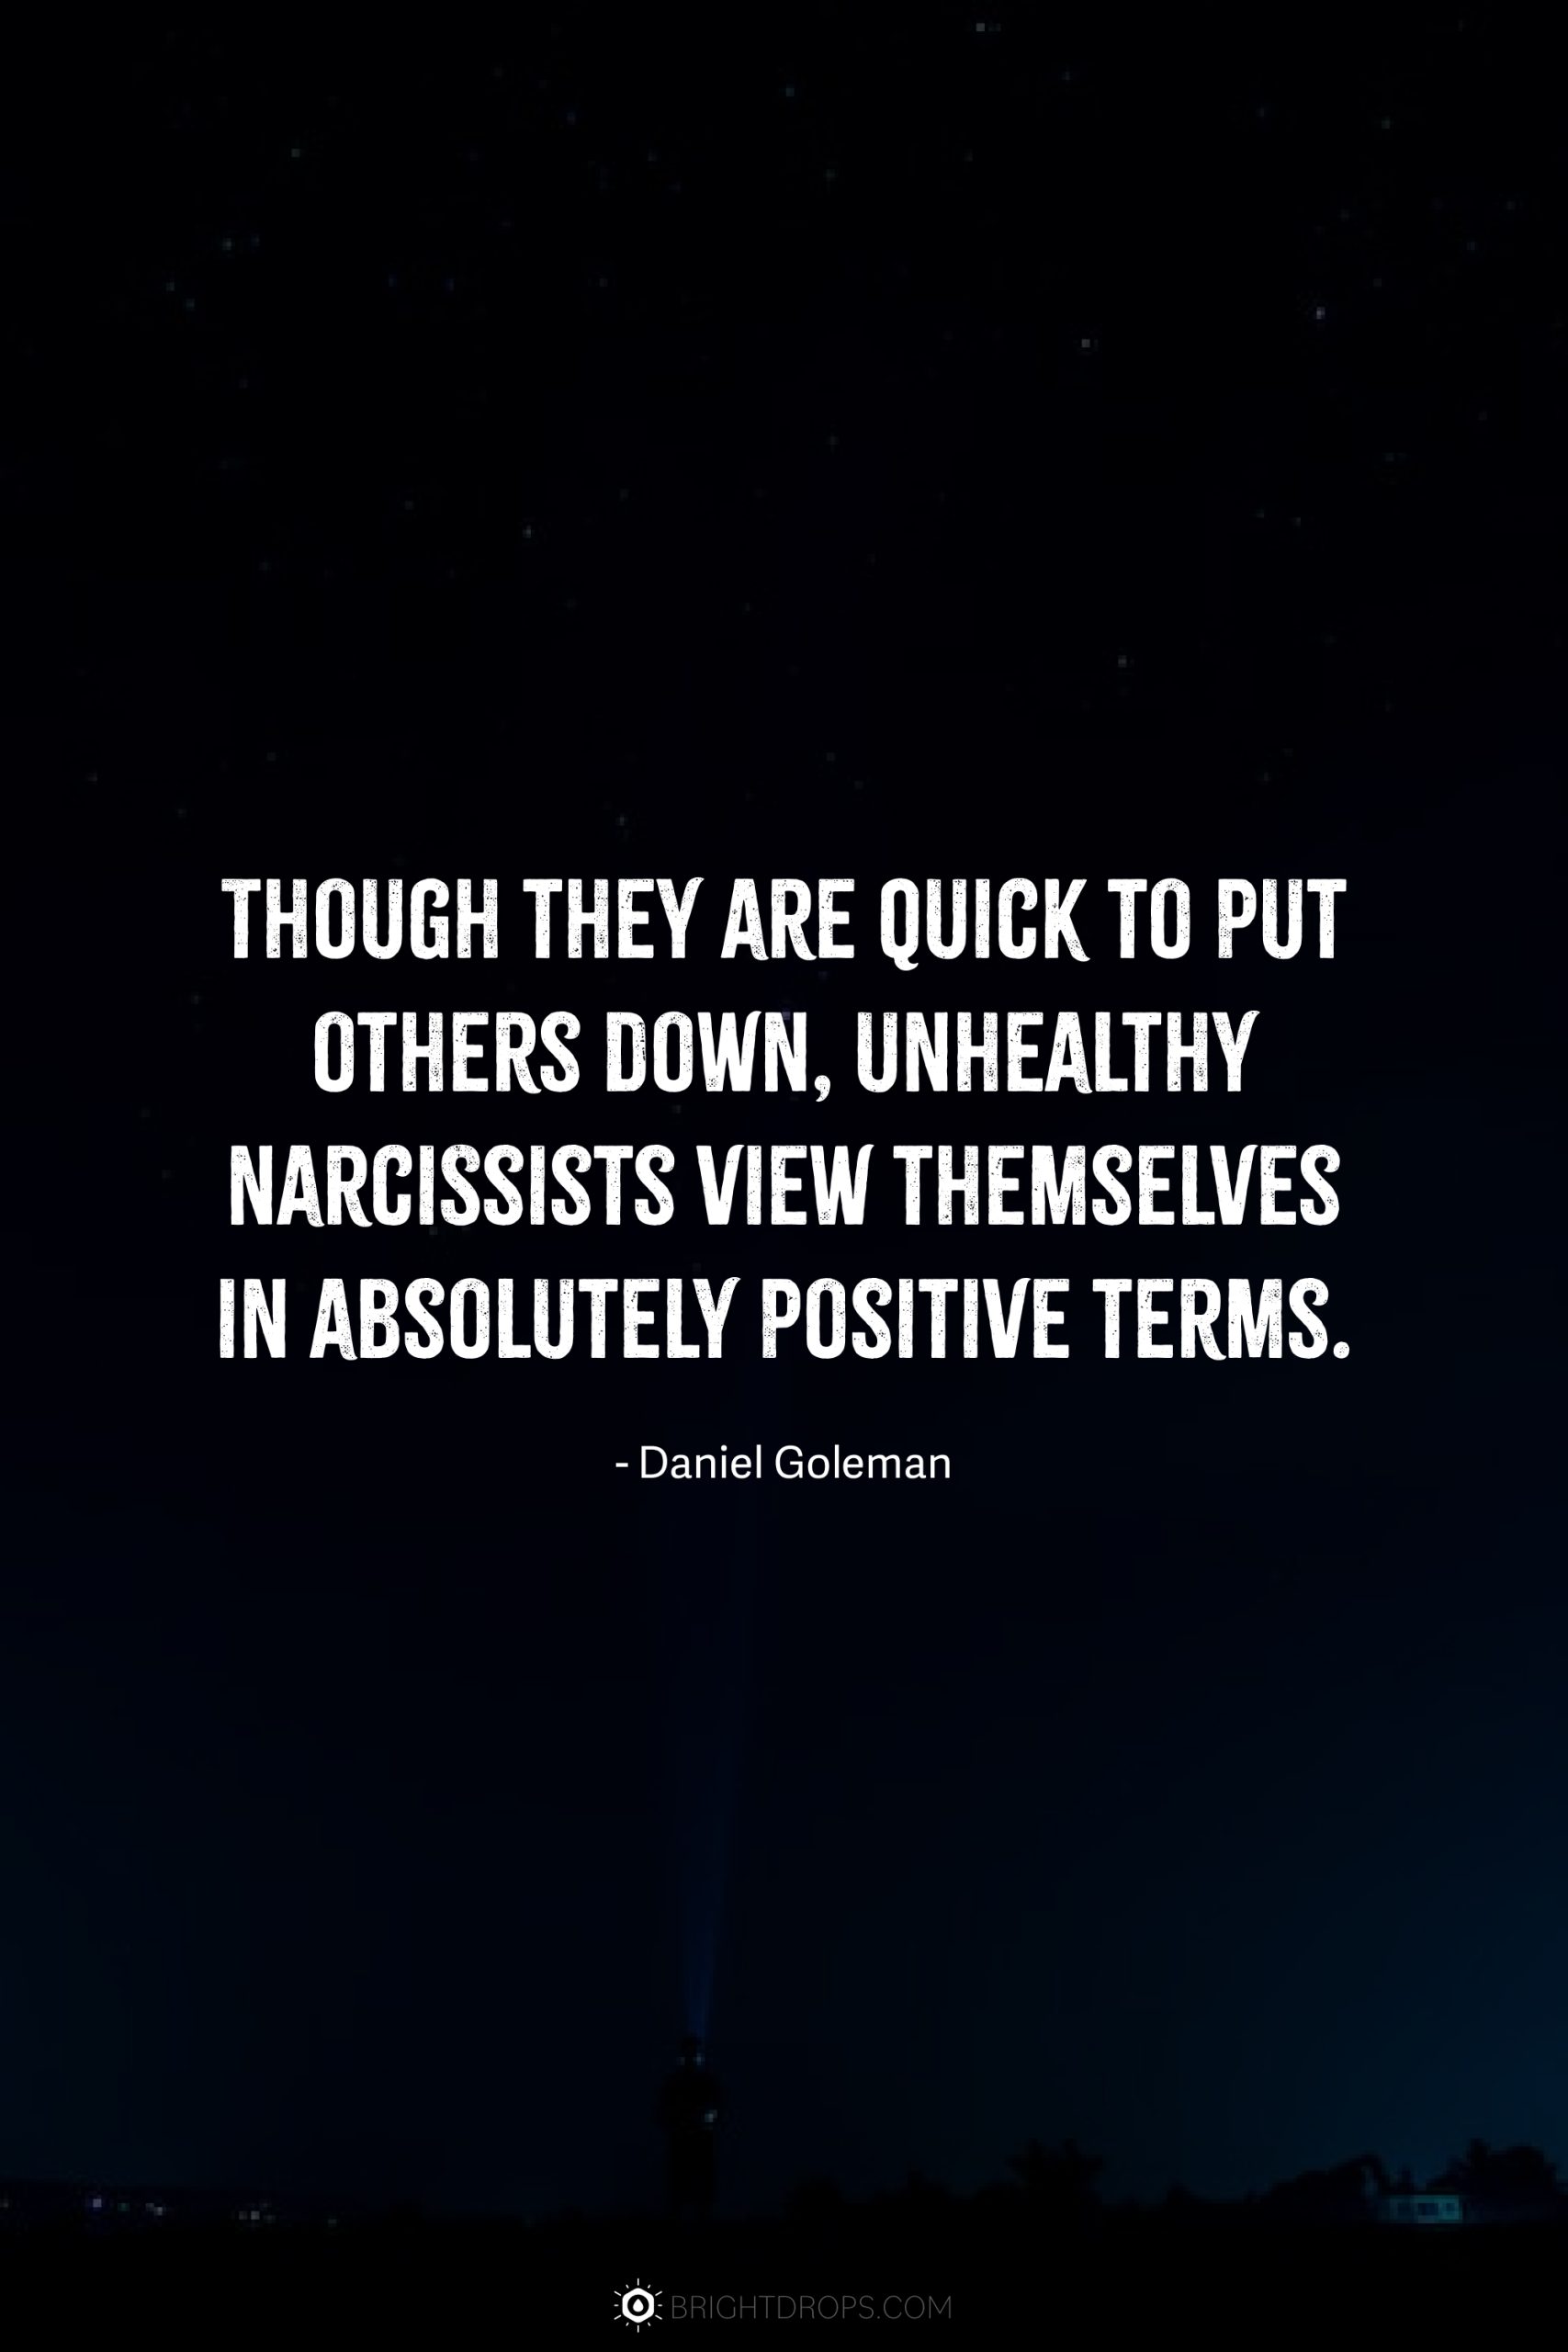 Though they are quick to put others down, unhealthy narcissists view themselves in absolutely positive terms.